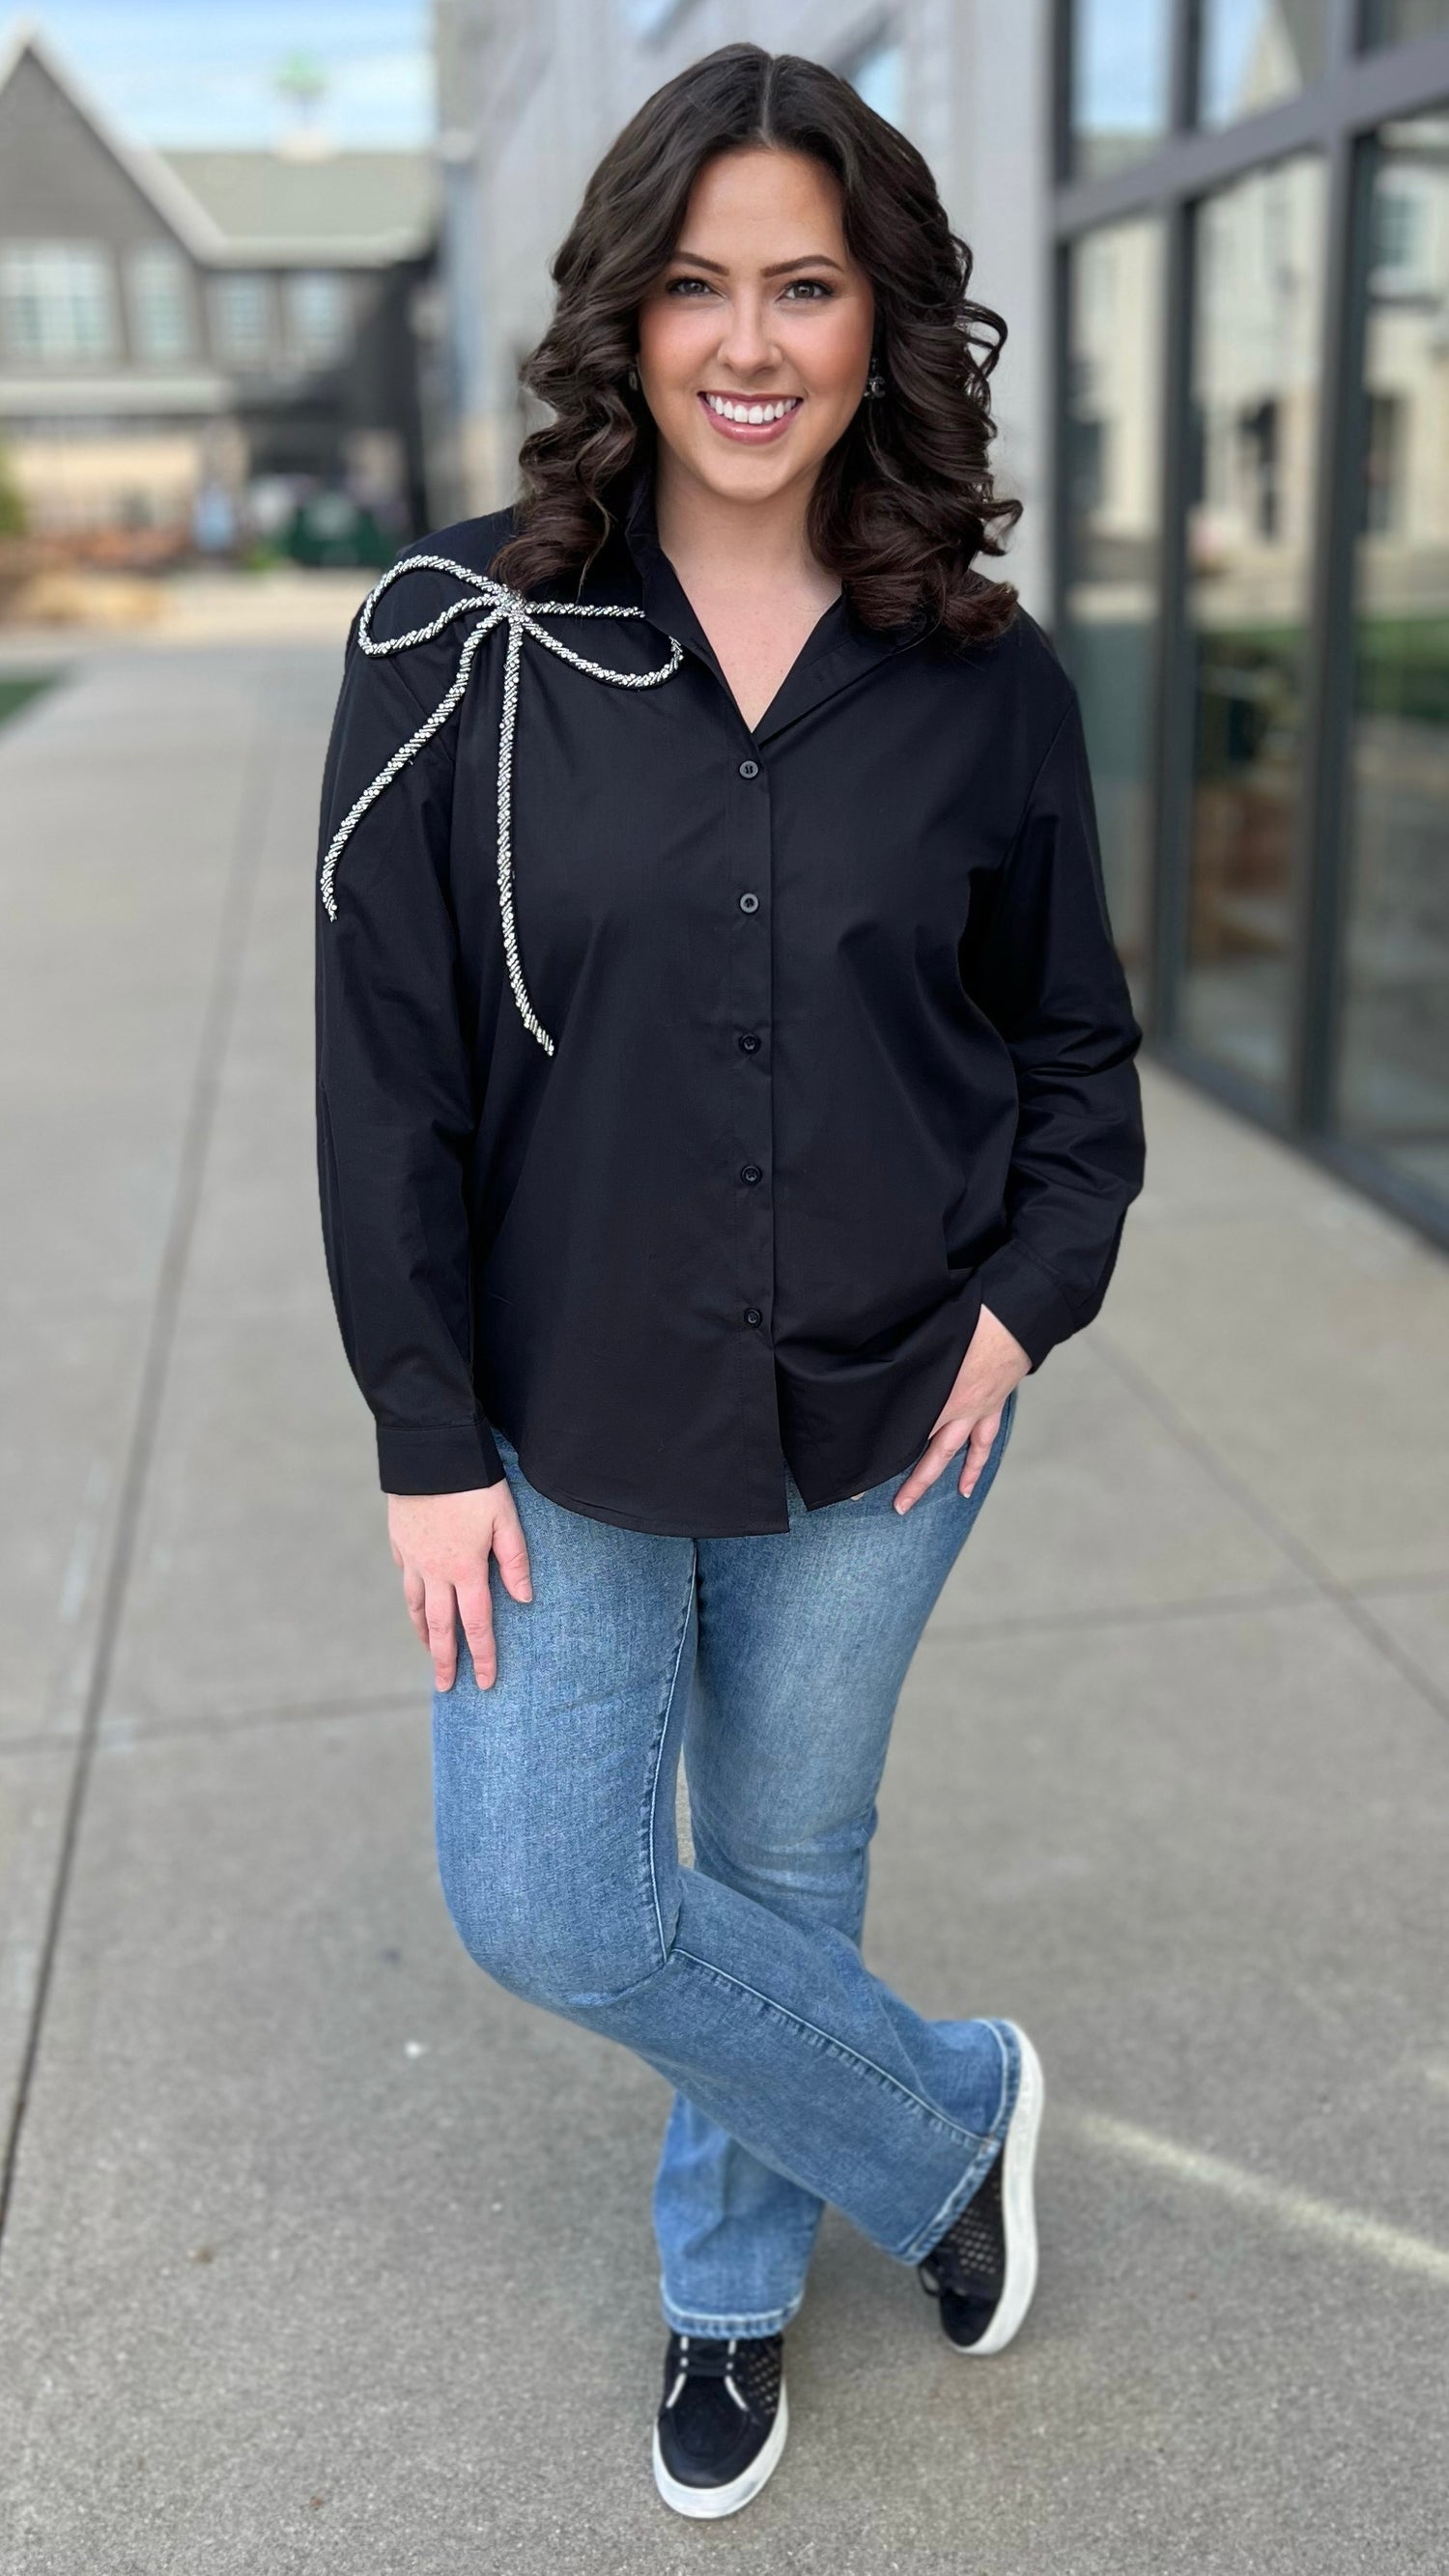 AD 2/23 - Bling Bow Blouse